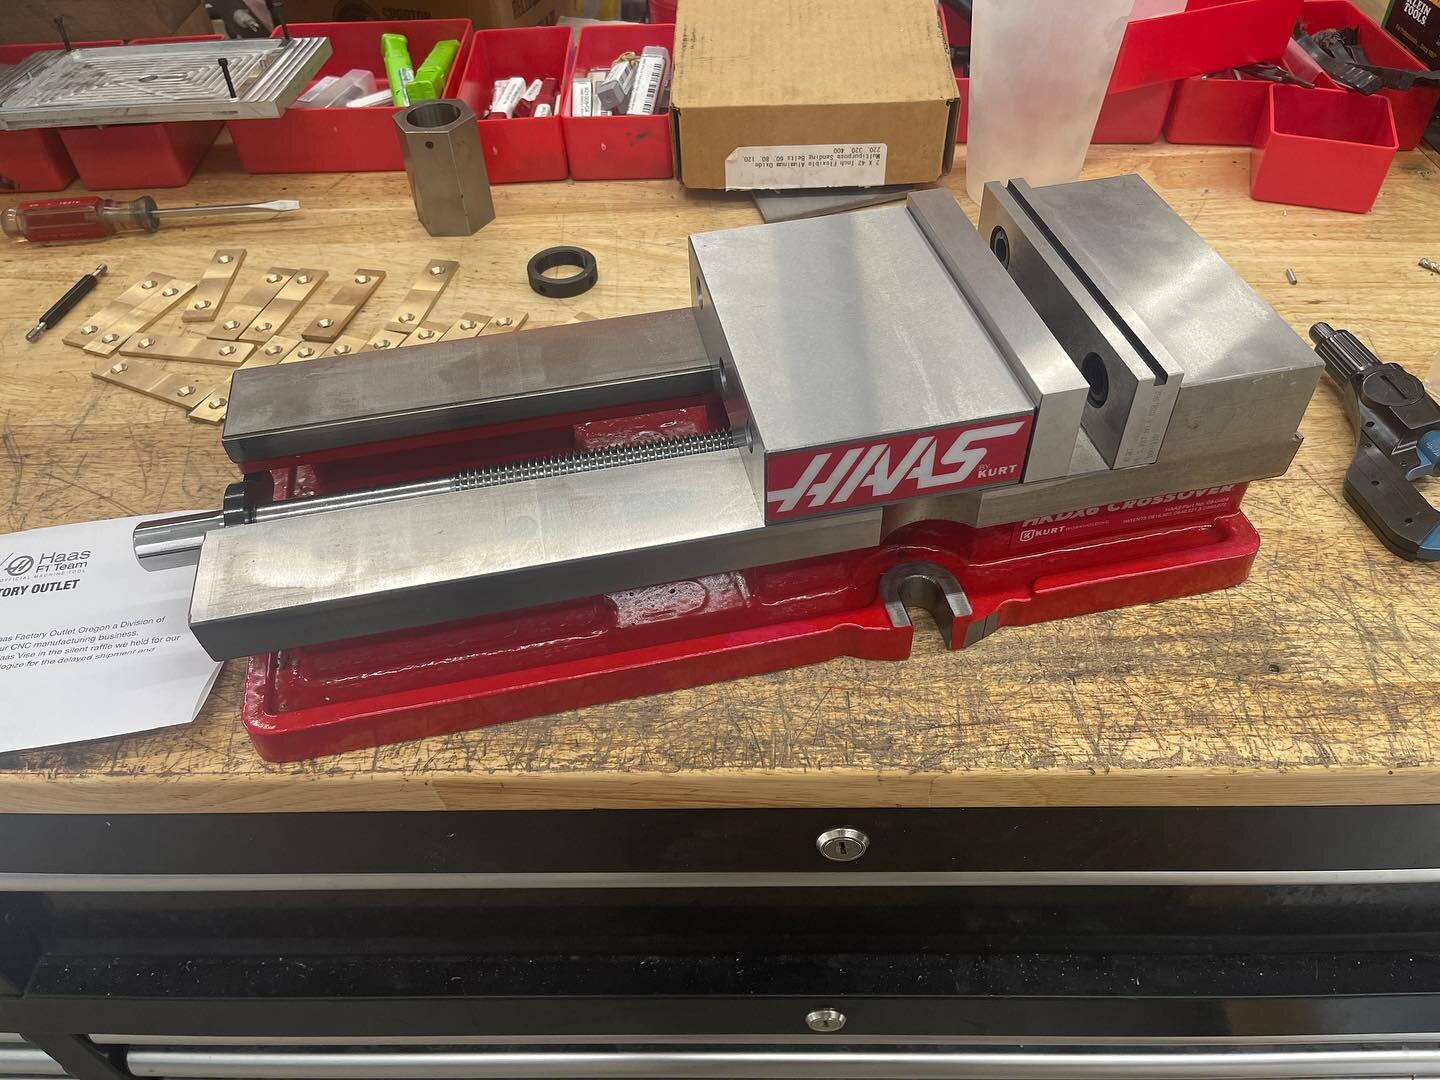 Pays to go to Haas demo days!  Won a raffle vise!! Thank you @selwaymachinetool and @haas_automation it went to a good home!  #belfantimachineworks #oregonmanufacturing #cncmachining #fusion360 #fusion360cam #makeanything #instamachinist